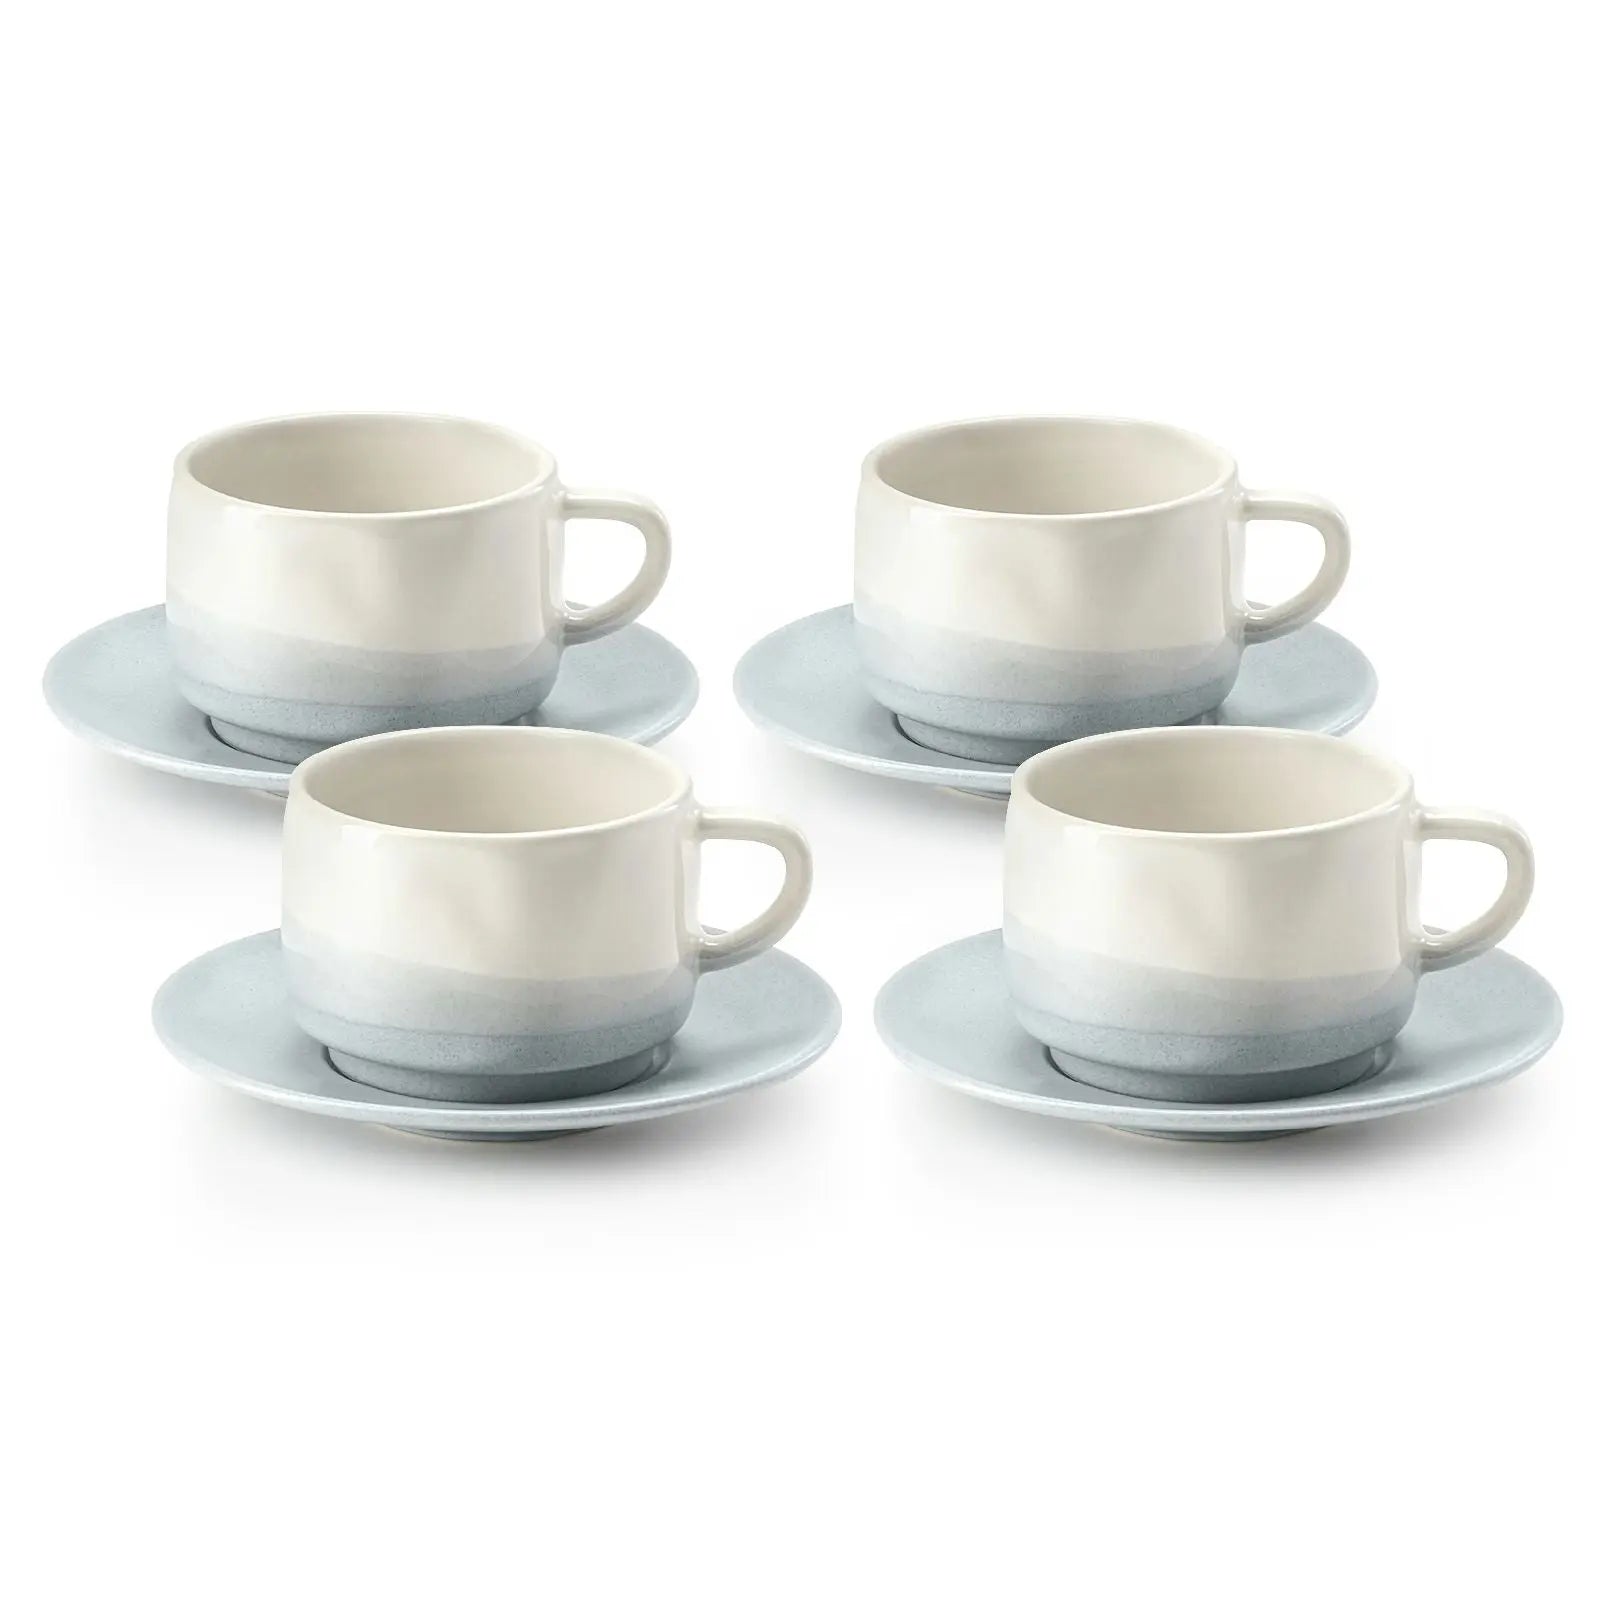 DOWAN Espresso Cups with Saucers, 3 oz Porcelain Demitasse Cups, Ceramic Coffee Cups, Set of 4, Blue & White